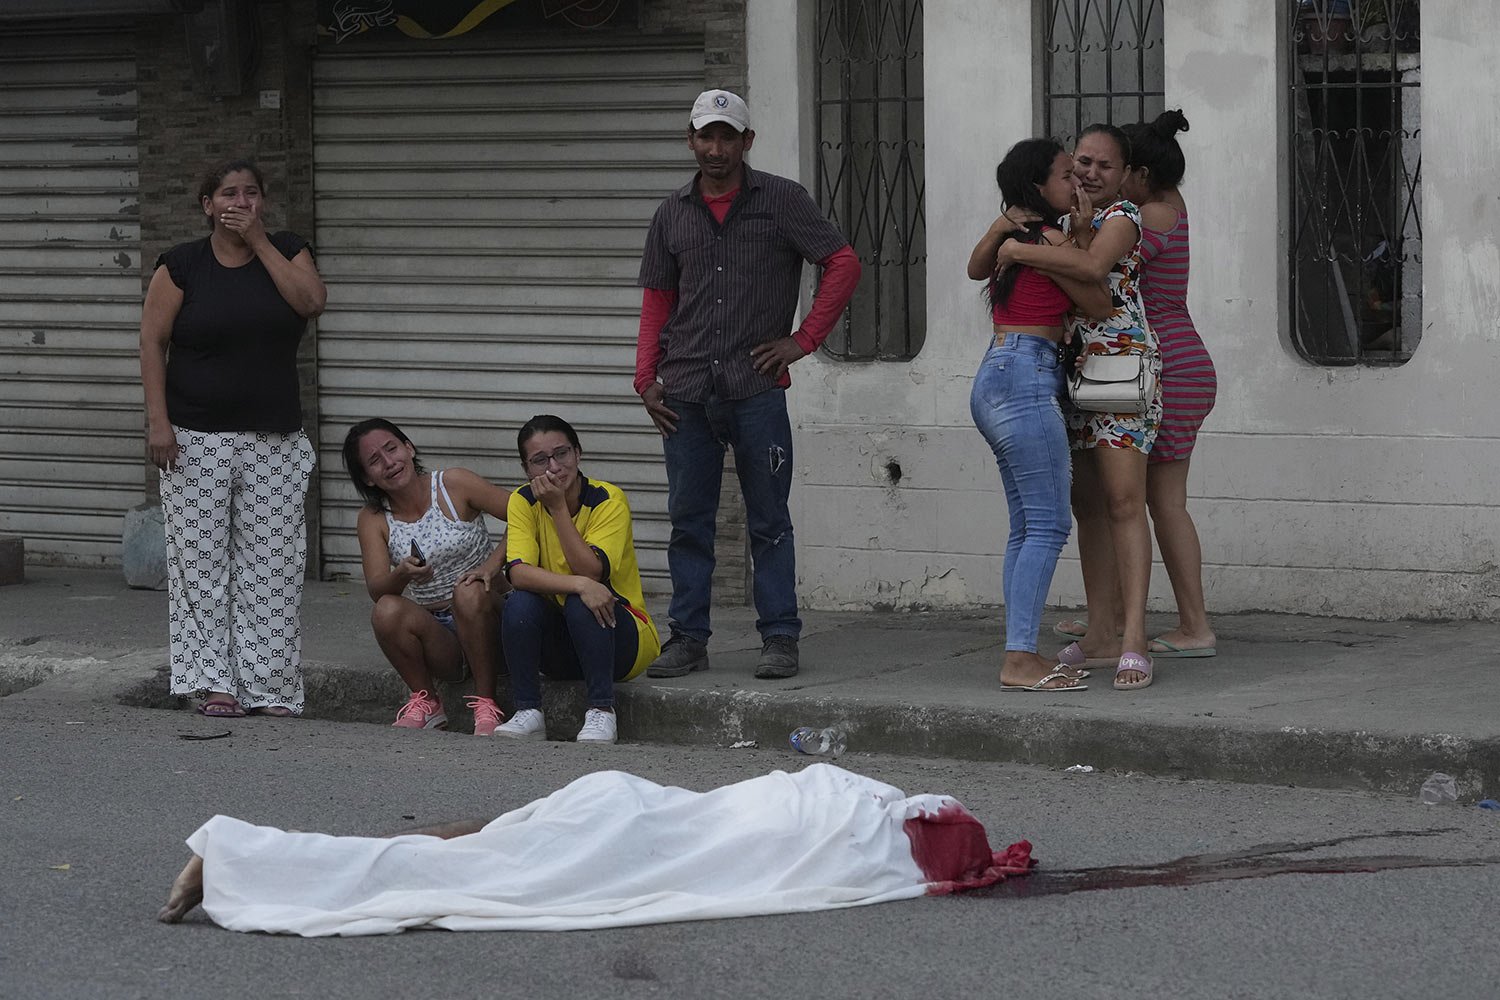  Persons grieve near the body of a man, killed in unknown circumstances, on a street in Duran, Ecuador, Friday, July 21, 2023. (AP Photo/Dolores Ochoa) 